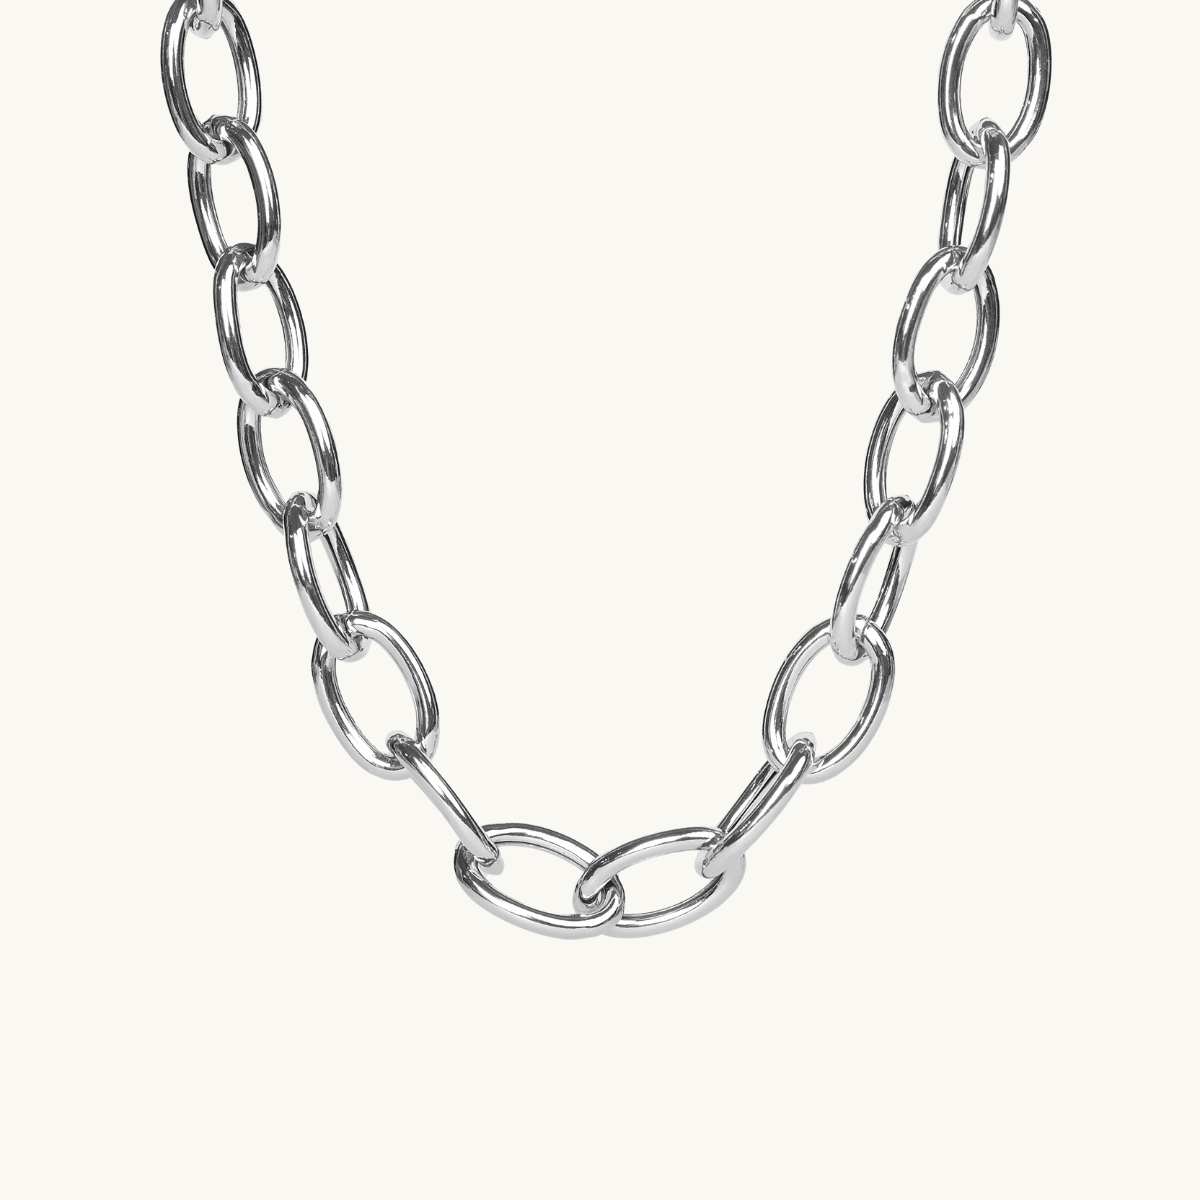 Necklace in silver, chunky chain